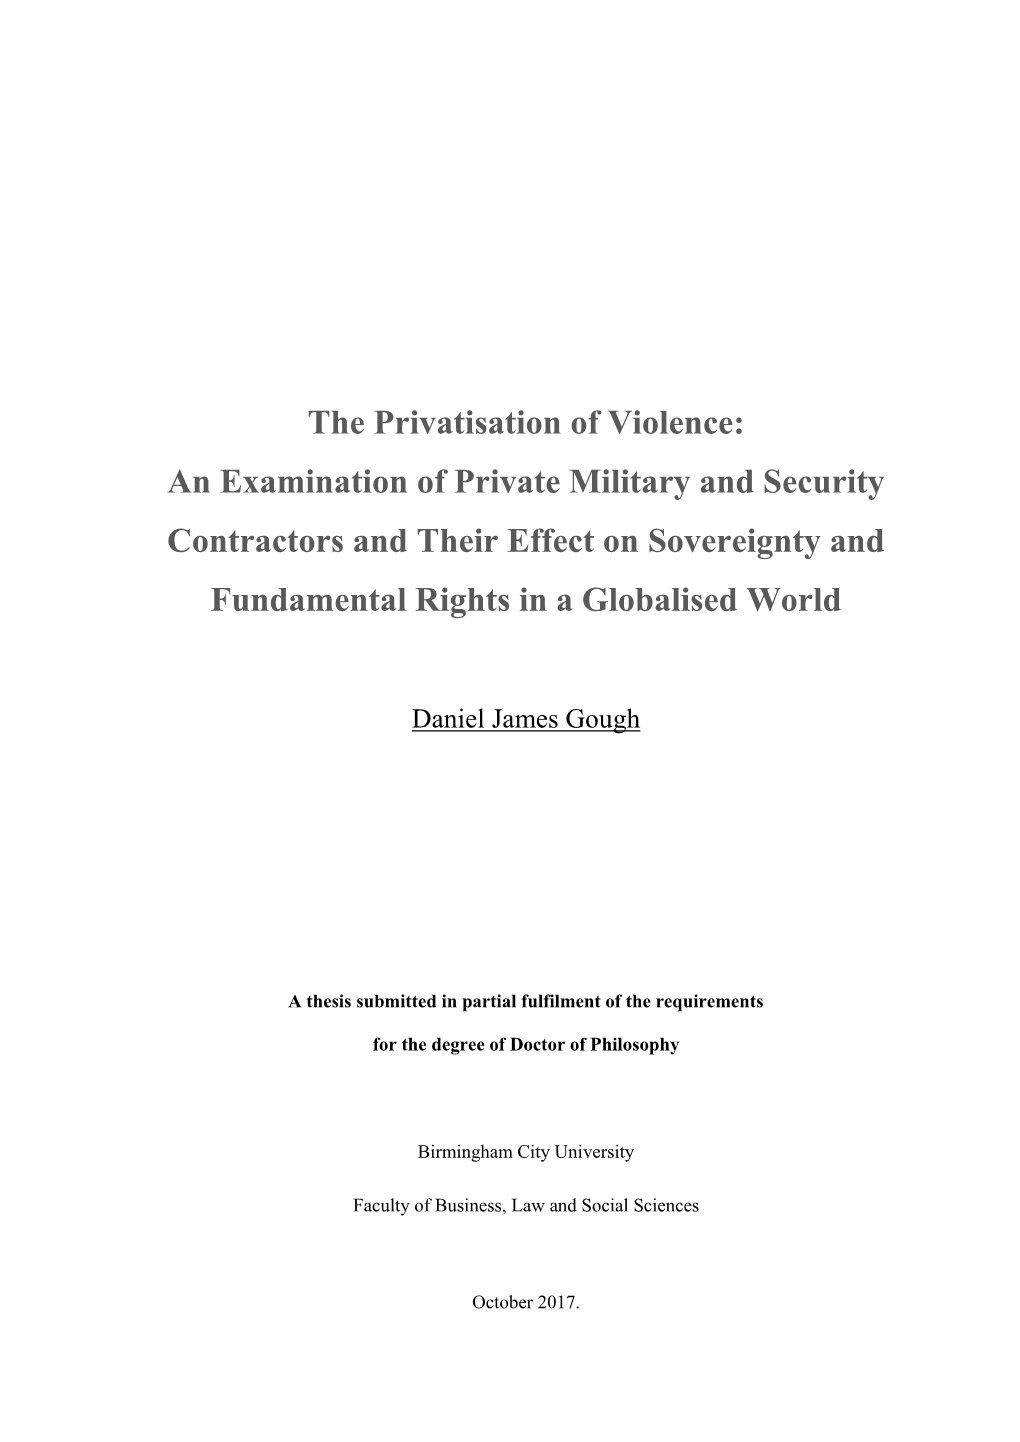 An Examination of Private Military and Security Contractors and Their Effect on Sovereignty and Fundamental Rights in a Globalised World